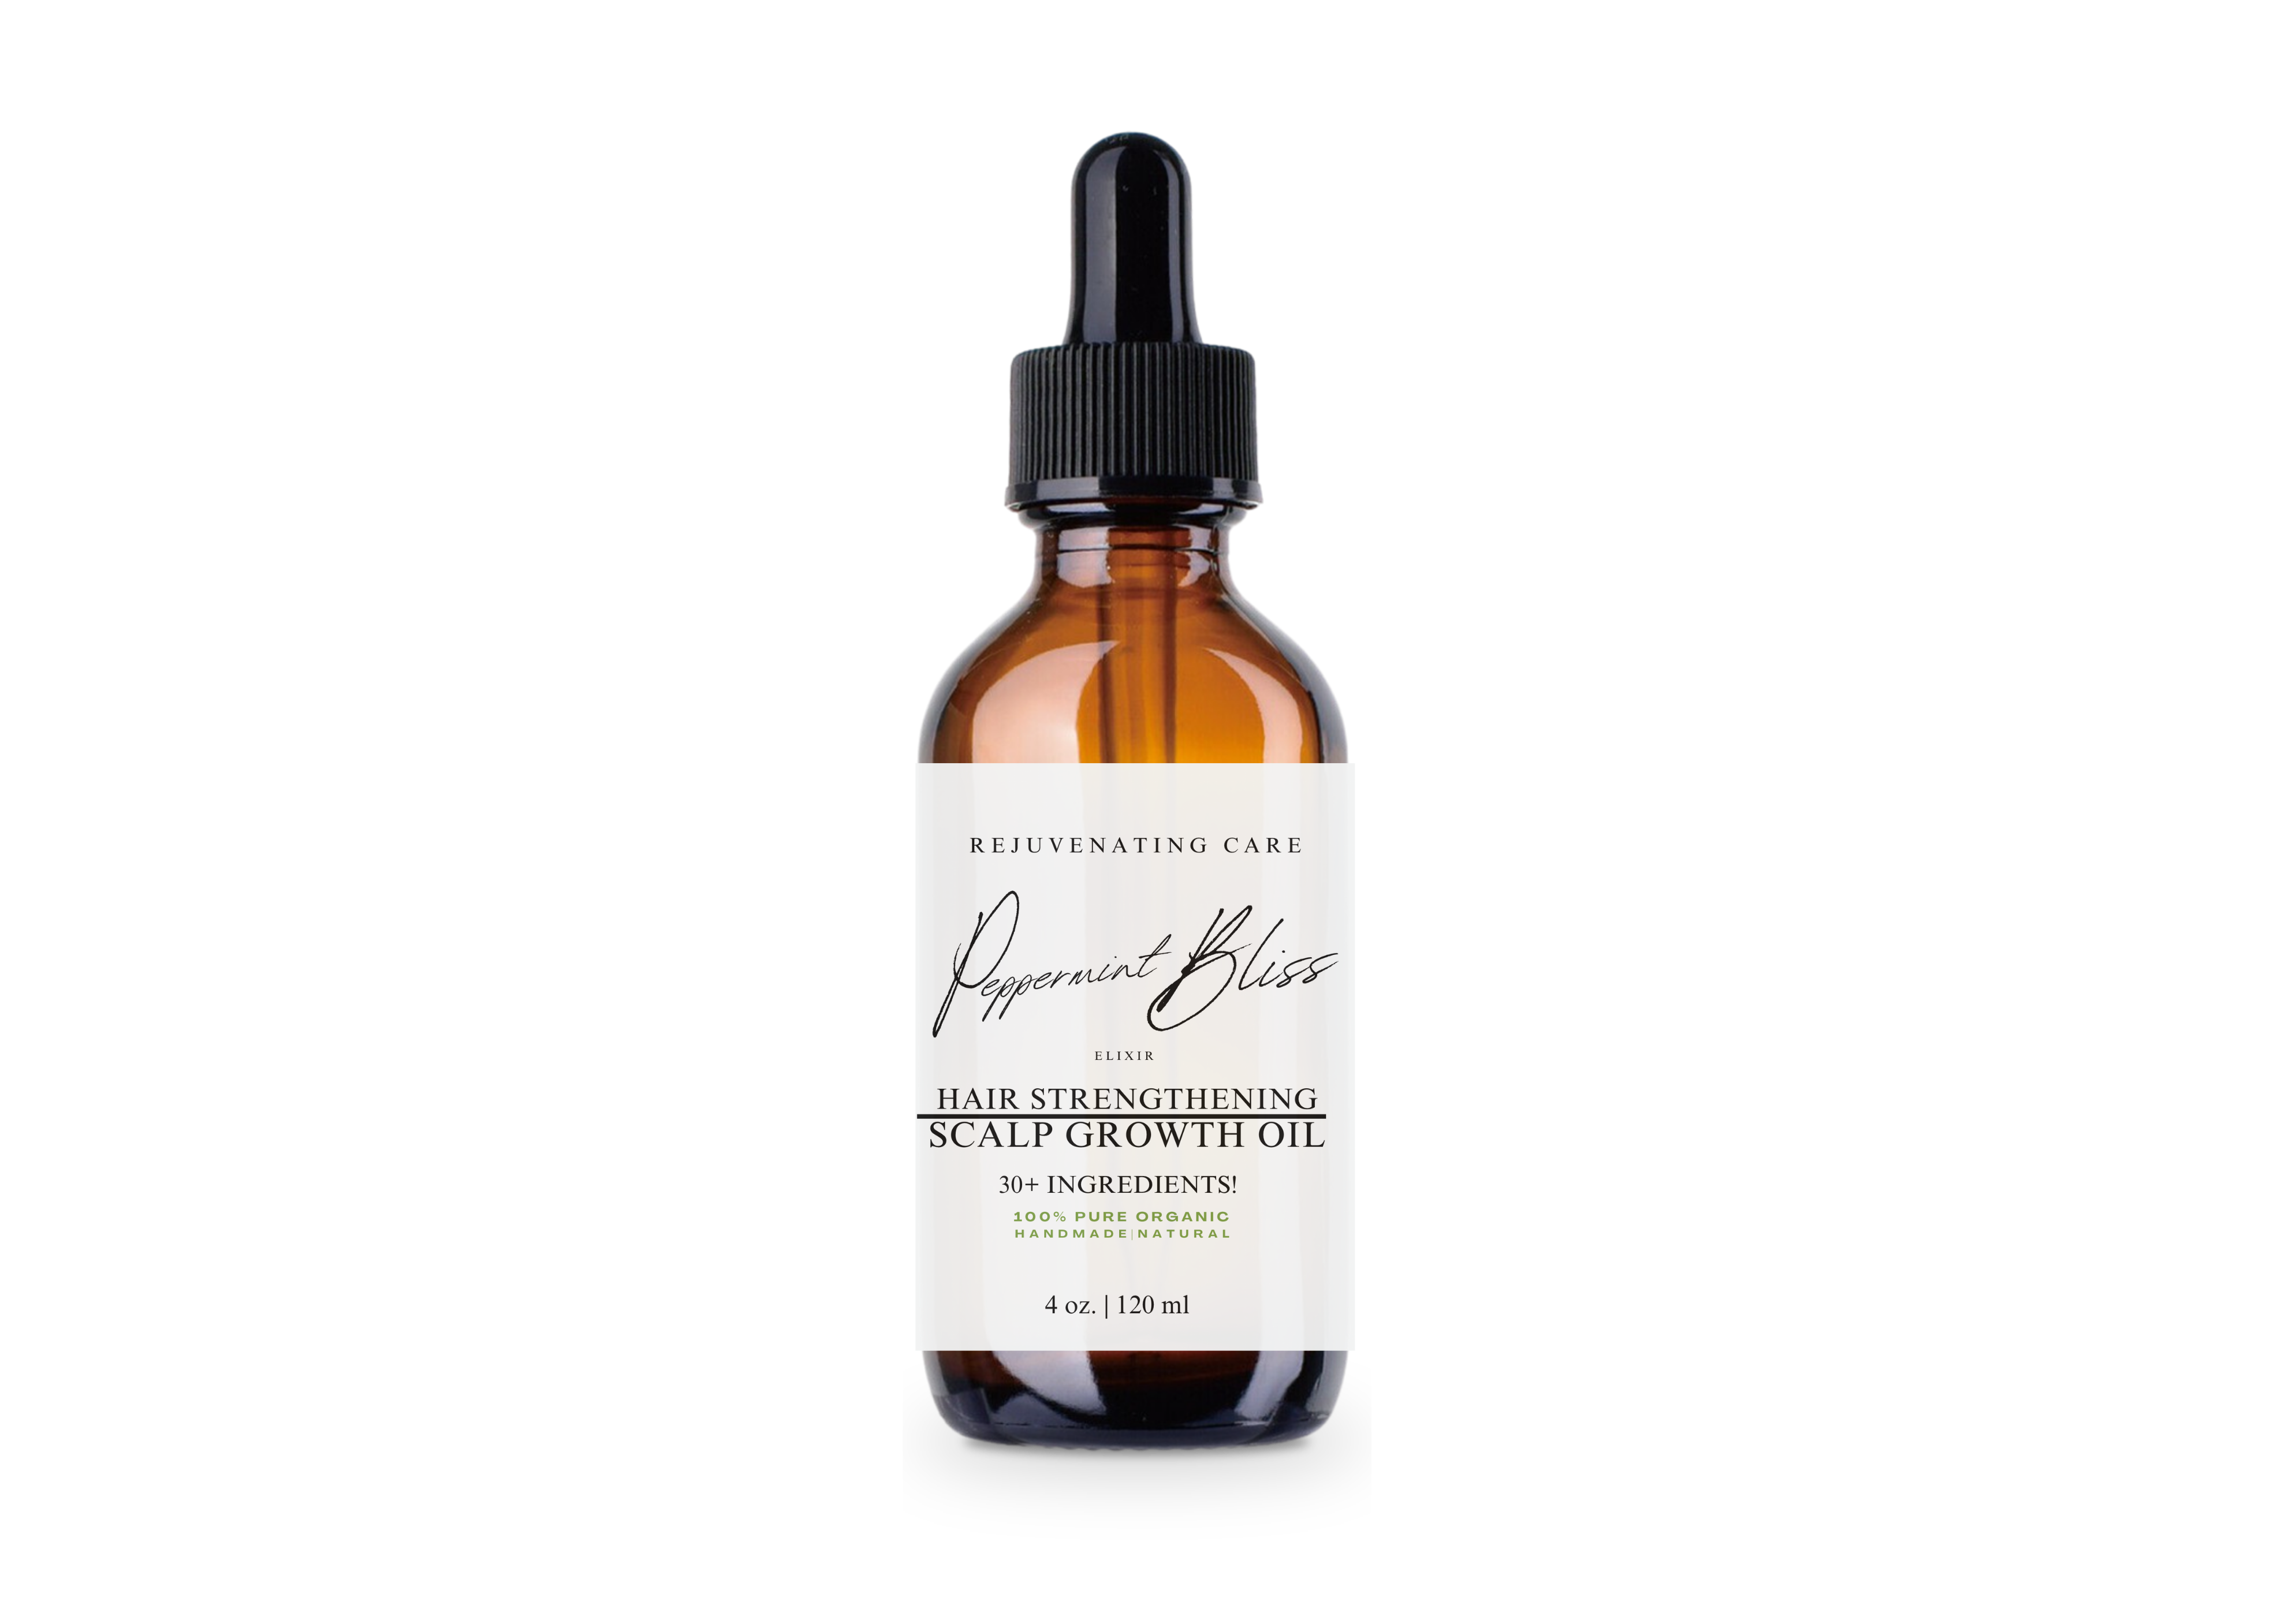 Peppermint Hair Strengthening and Scalp Growth Oil 4oz